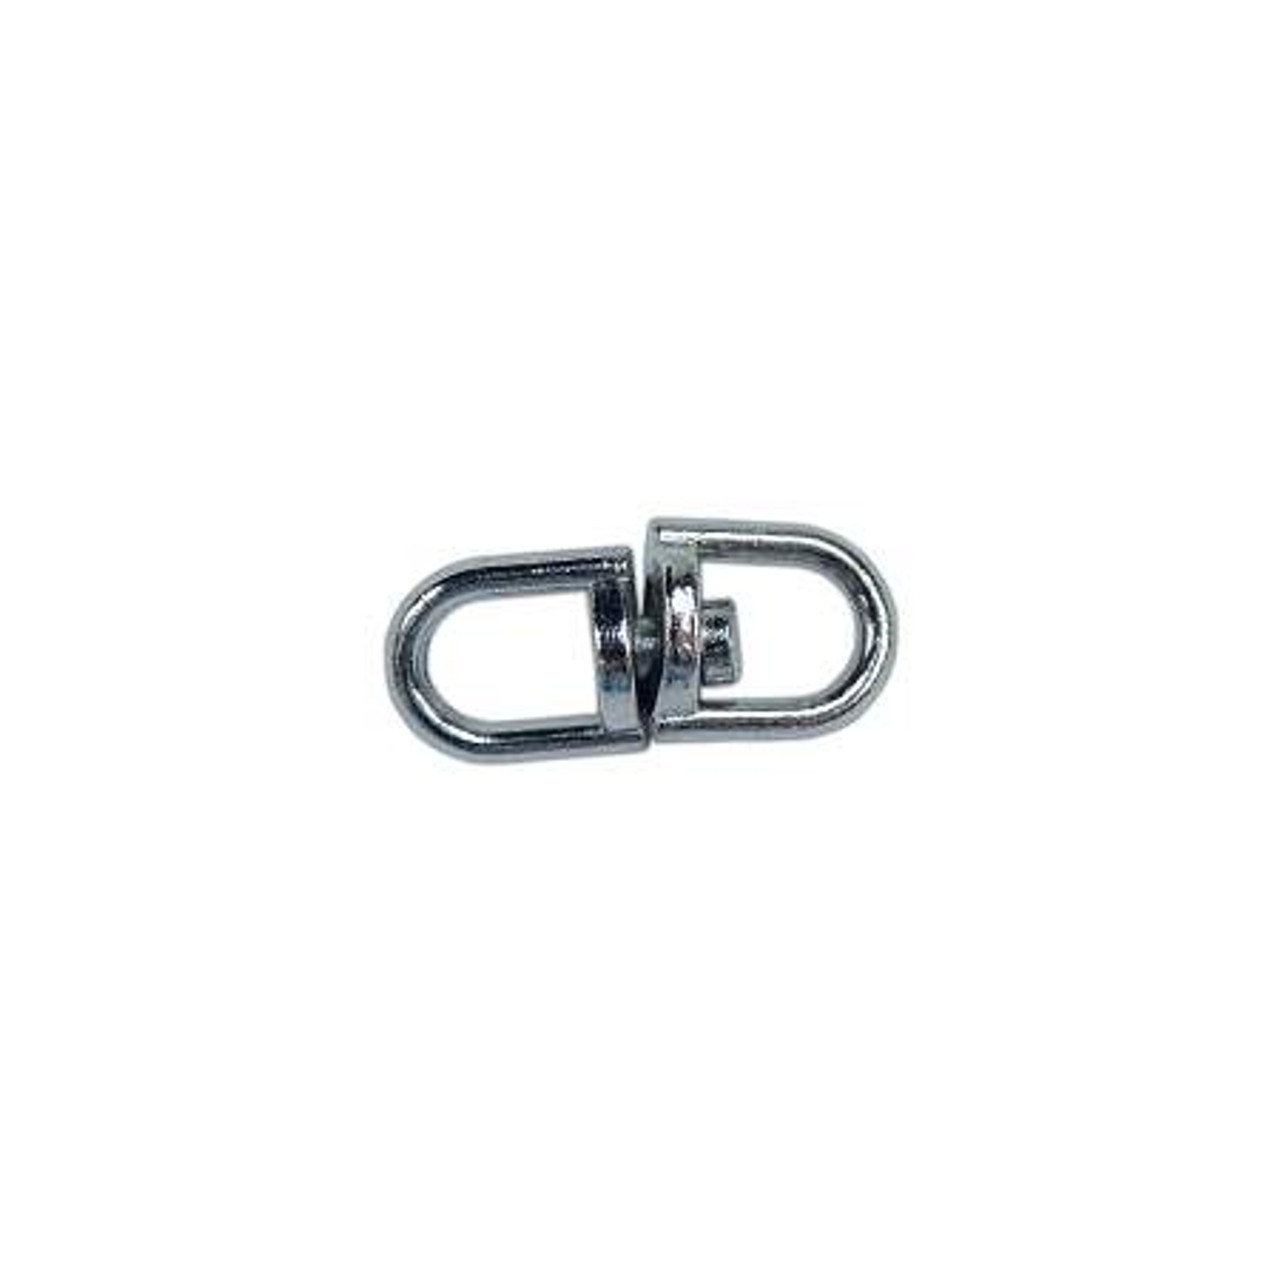 Paracord Planet Black Plastic Triangle Carabiner Clips for 1 Inch